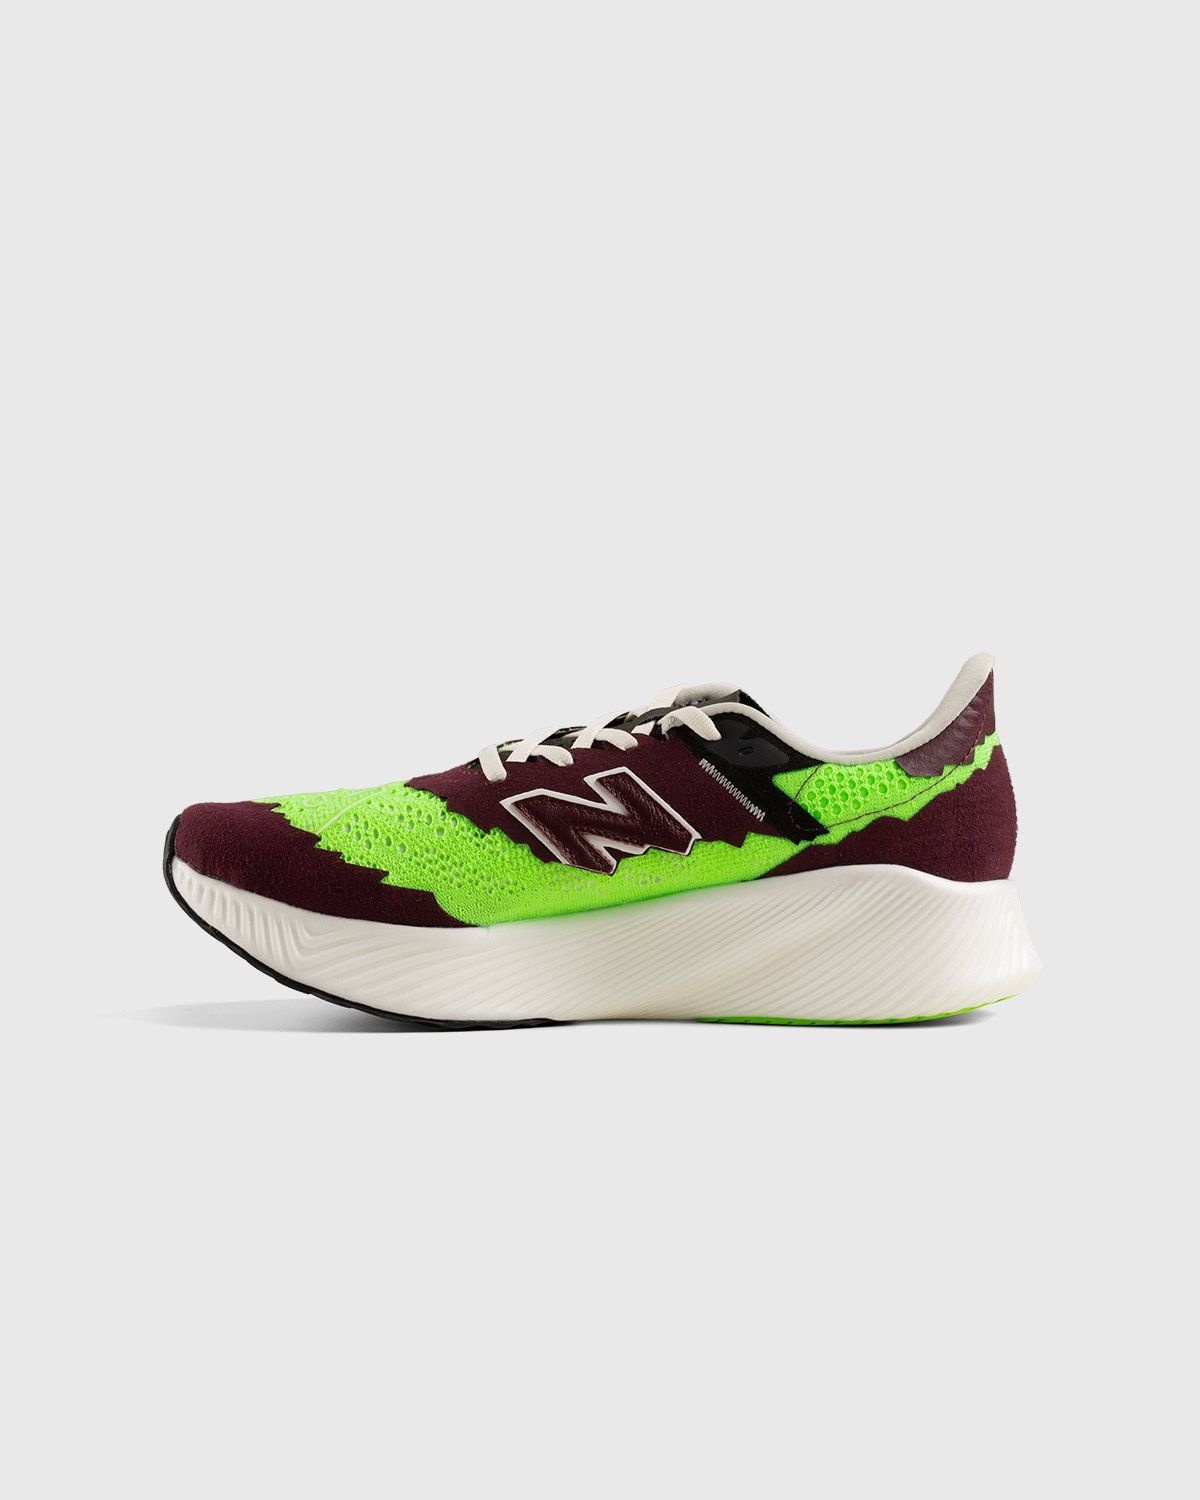 New Balance x Stone Island – FuelCell RC Elite v2 Energy Lime - Low Top Sneakers - Green - Image 2